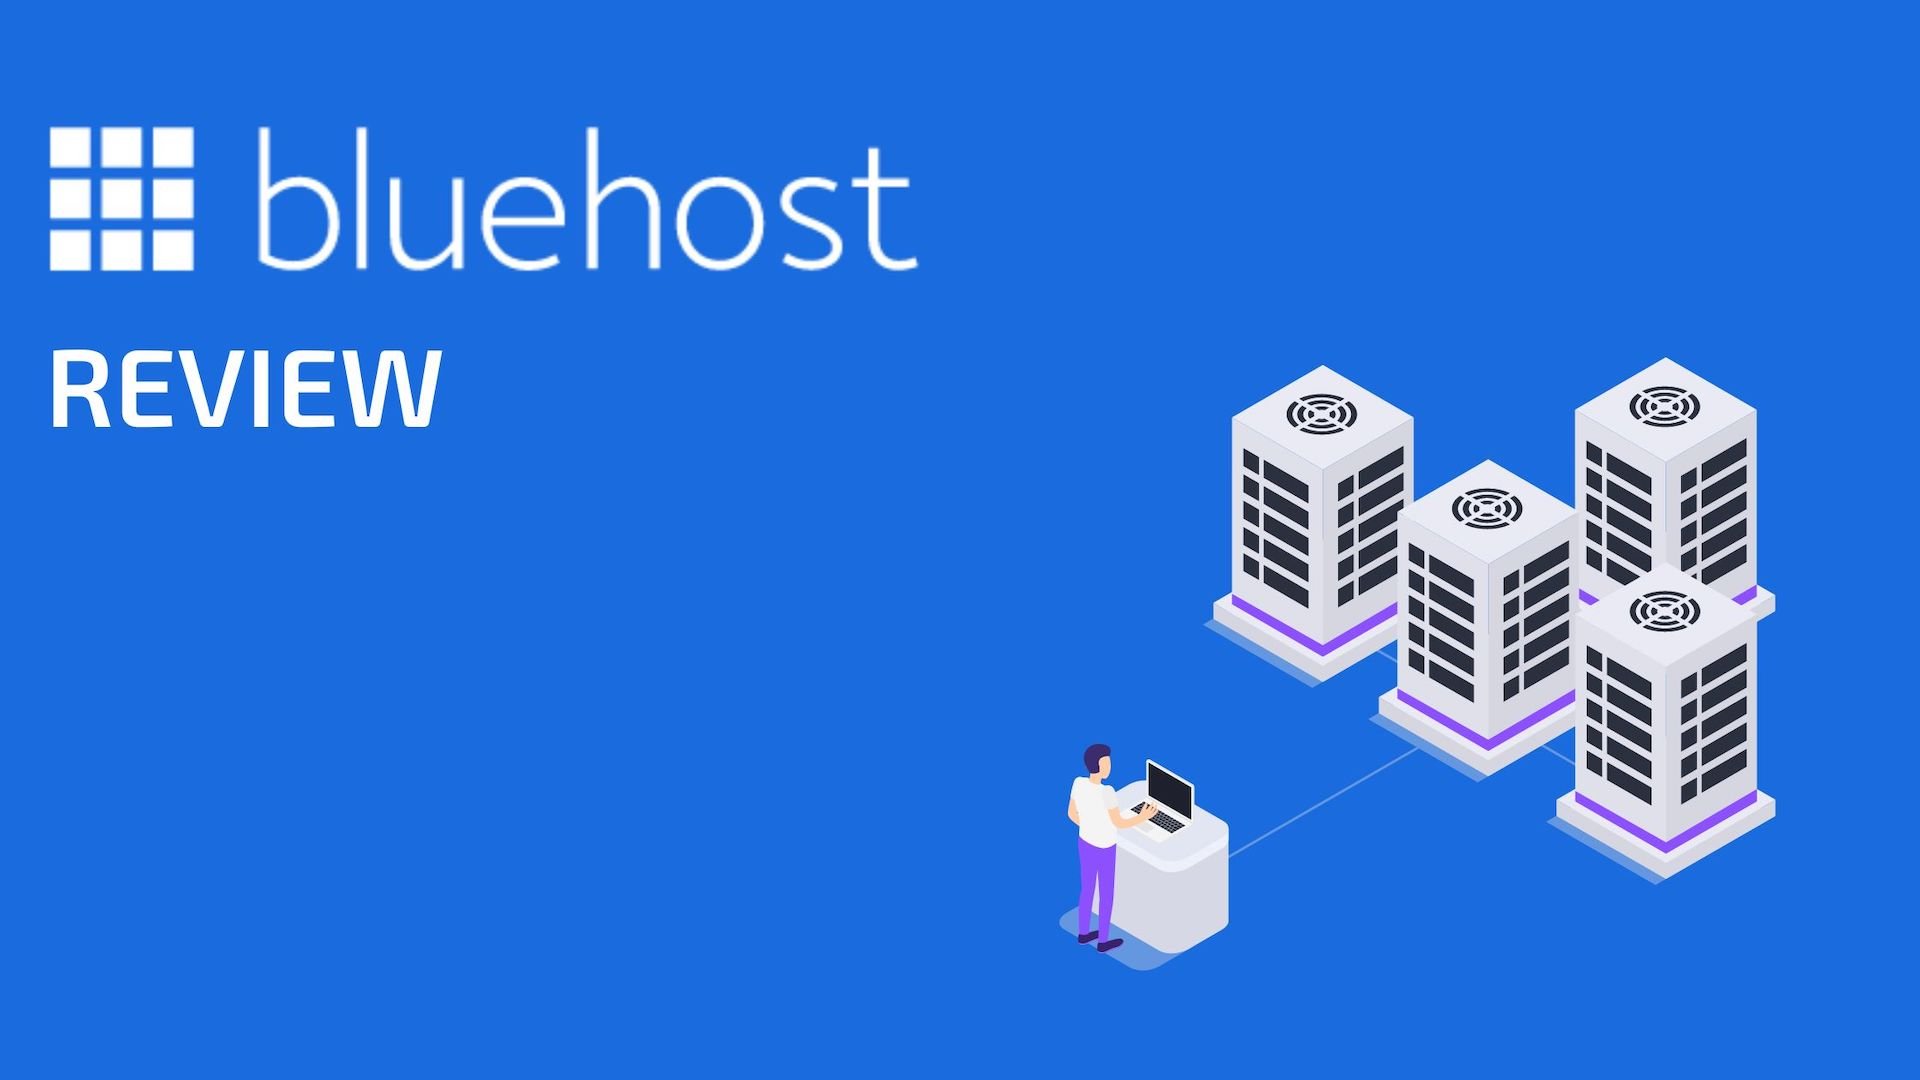 Bluehost hosting plans- bluehost review